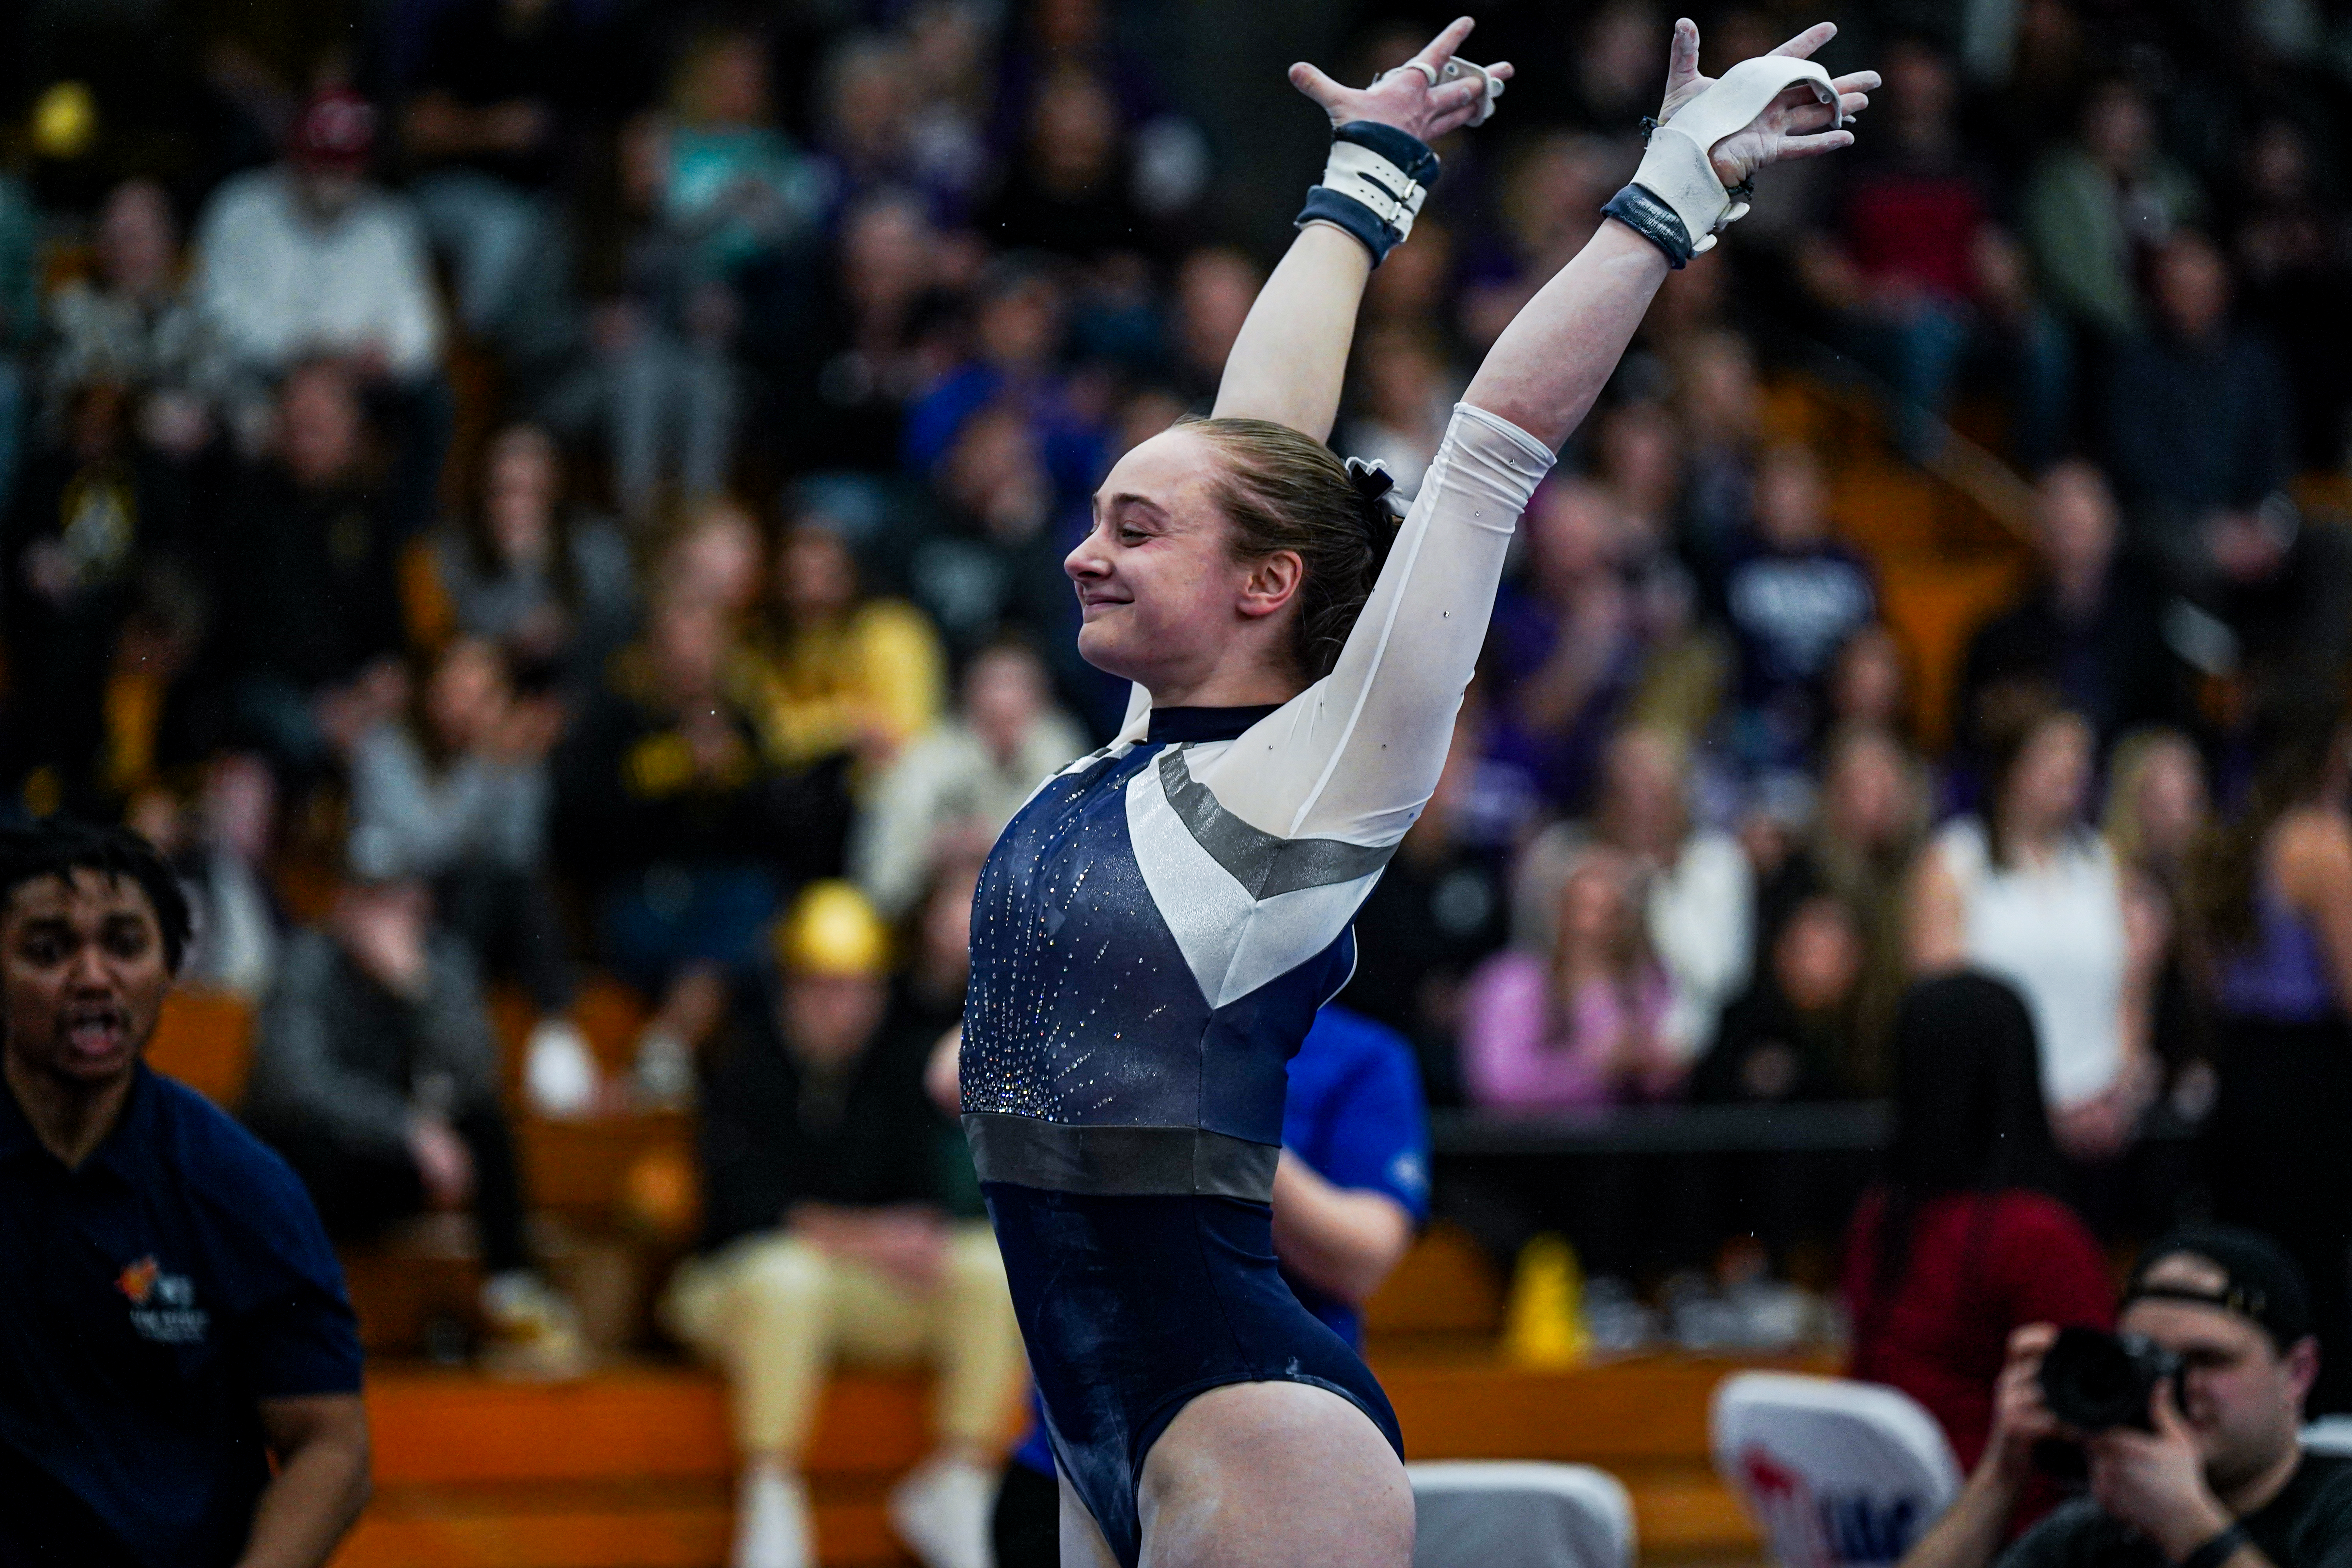 Enjoying the ride: Gymnastics team excited about return to NCGA national meet